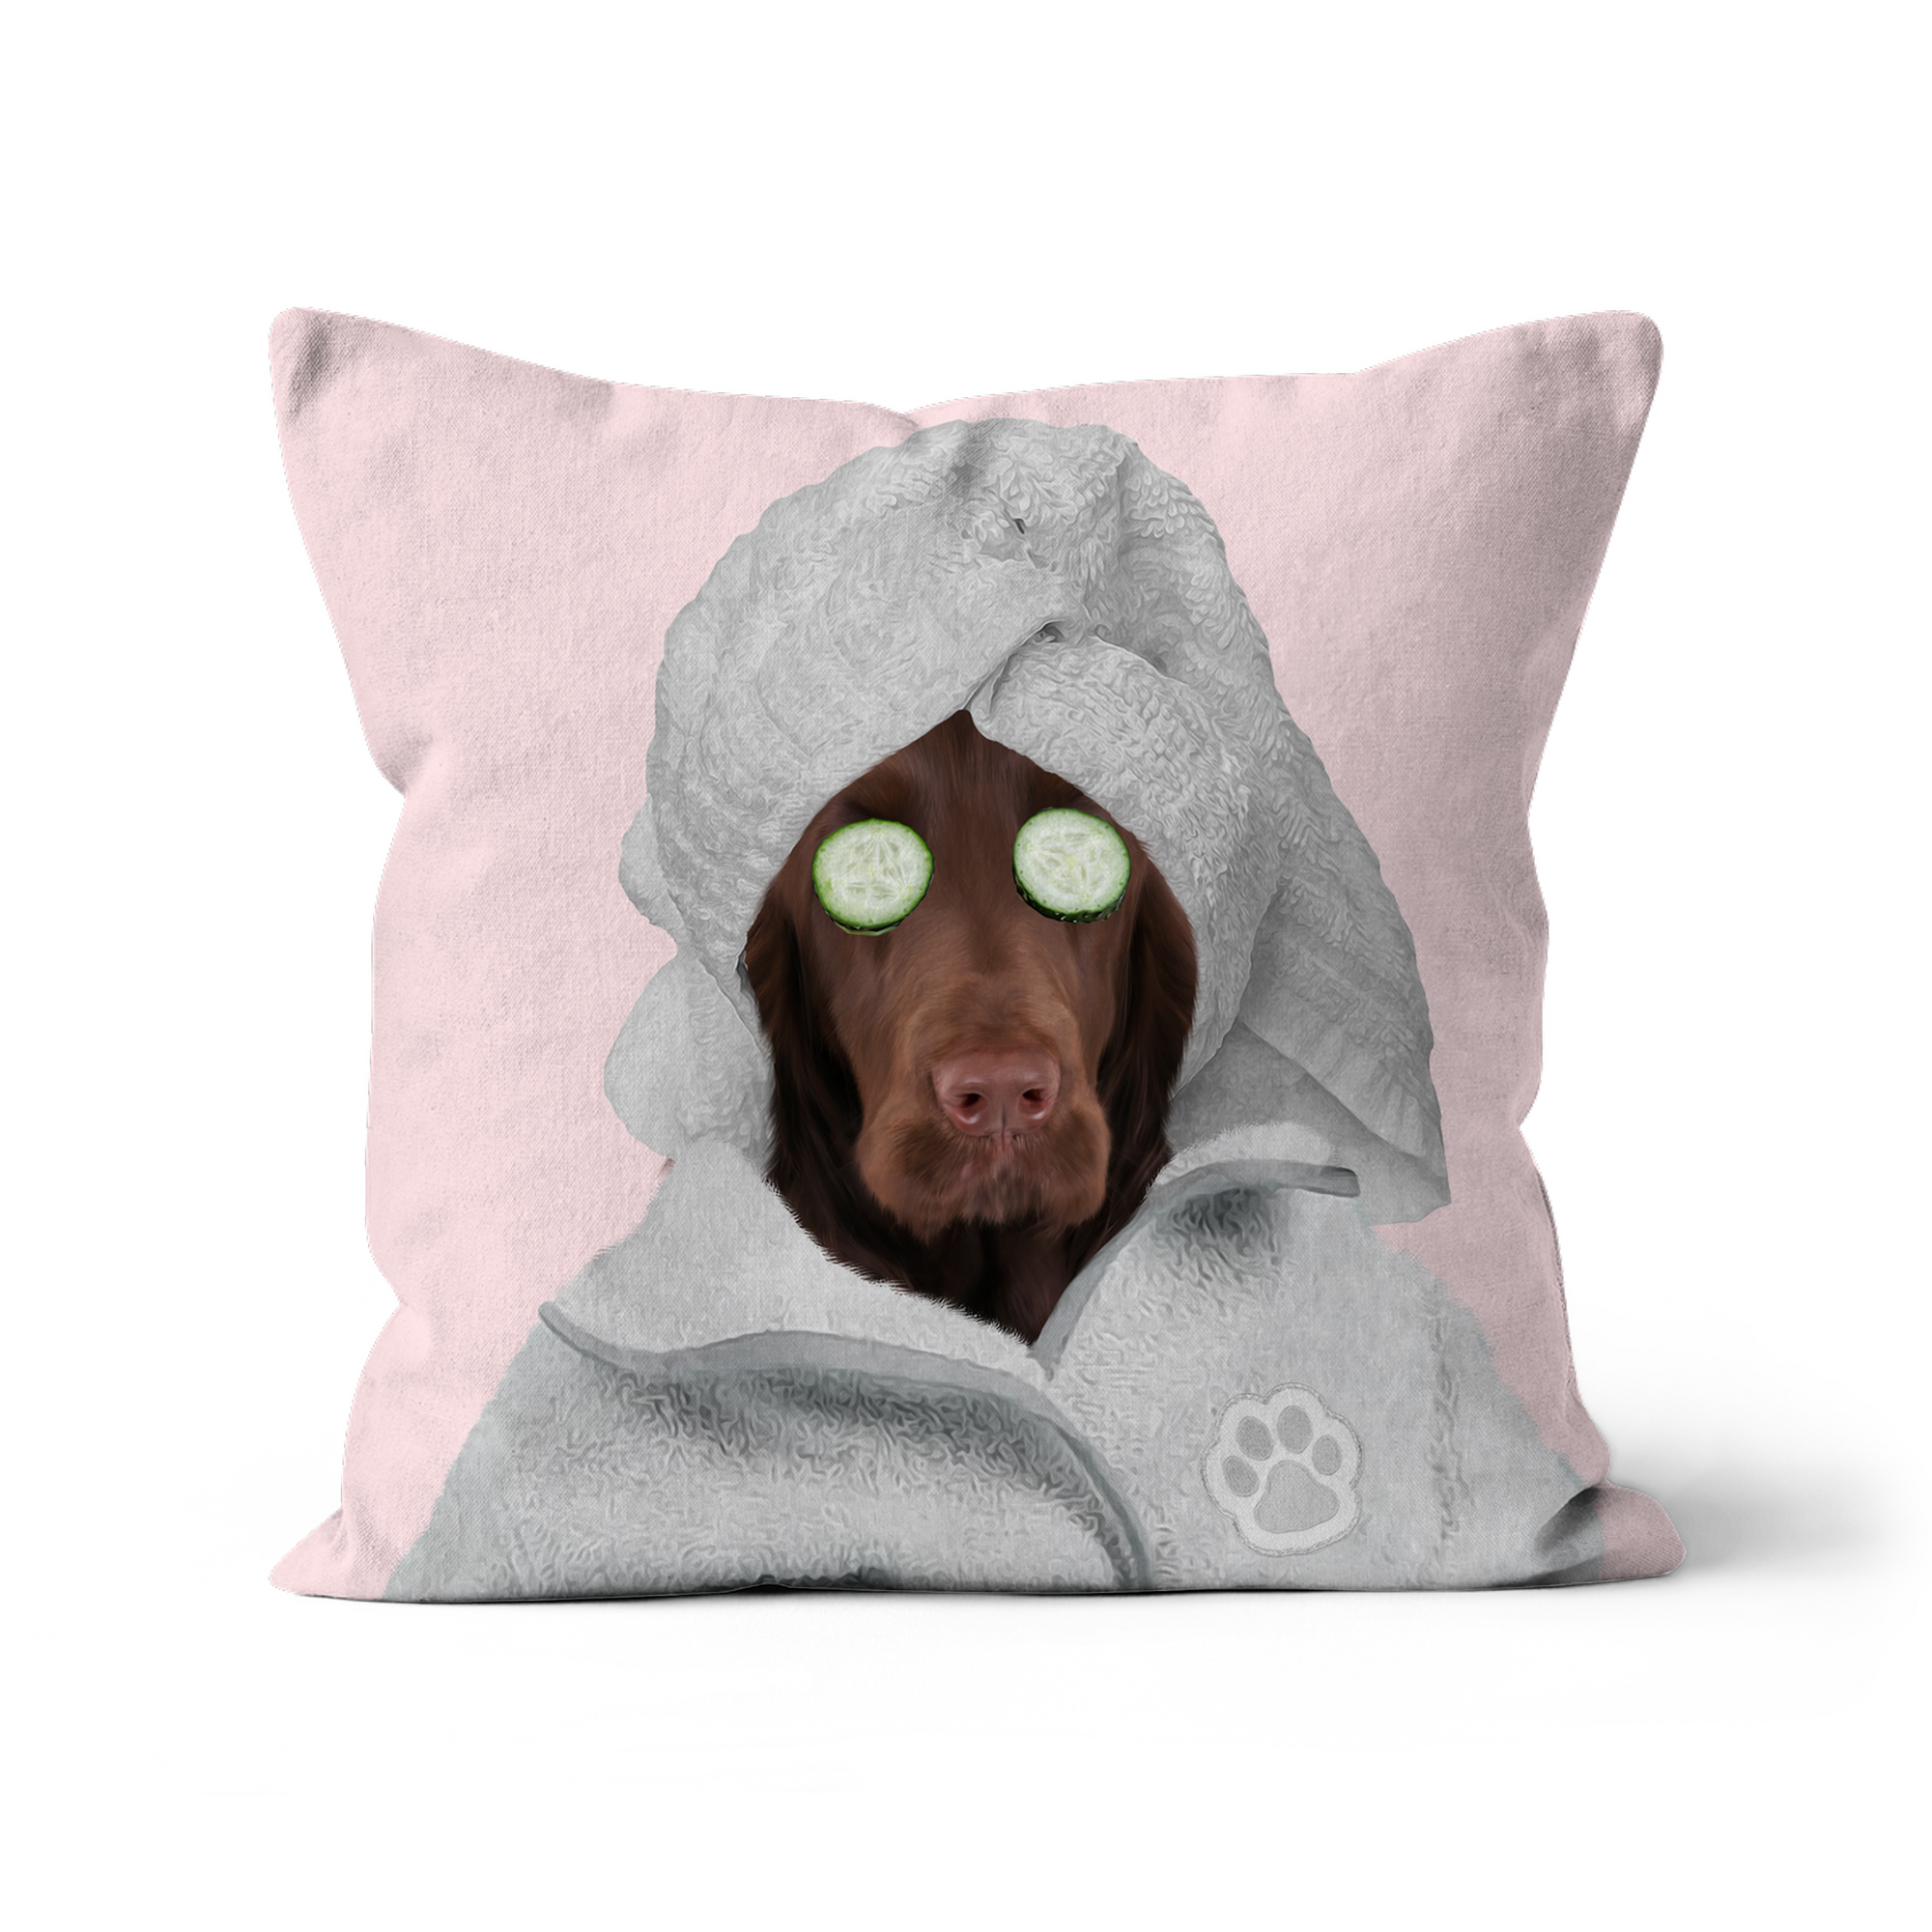 Spa Day: Custom Pet Pillow - Paw & Glory - #pet portraits# - #dog portraits# - #pet portraits uk# - #pawandglory#, dog pillow custom, custom pet pillows, pup pillows, pillow with dogs face, dog pillow cases